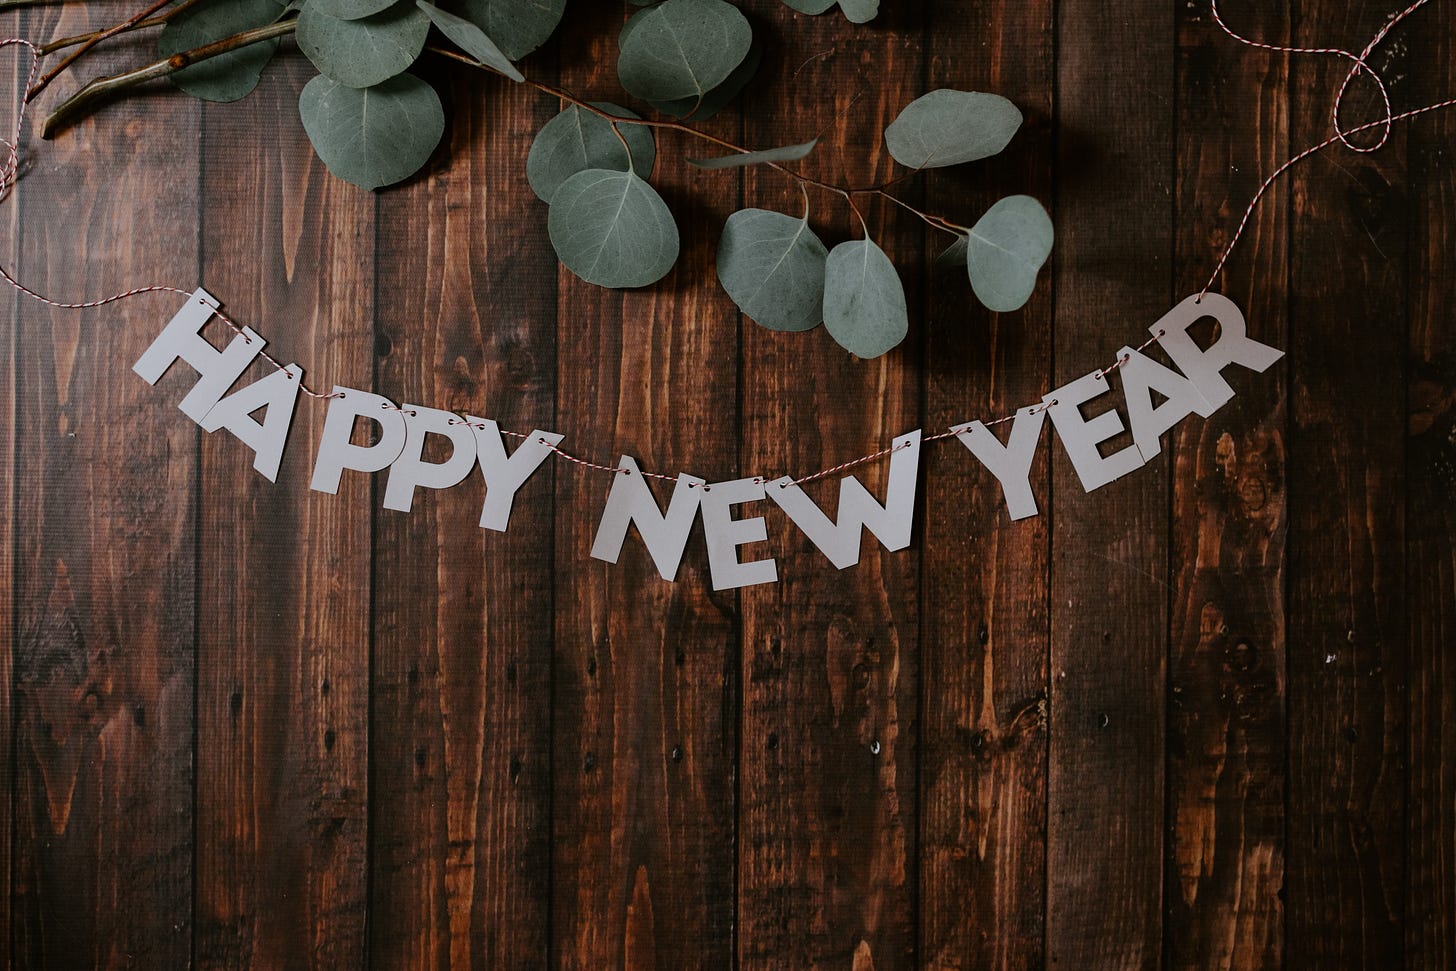 Banner reading "Happy new year" strung across a wood panelled wall with some ivy above.